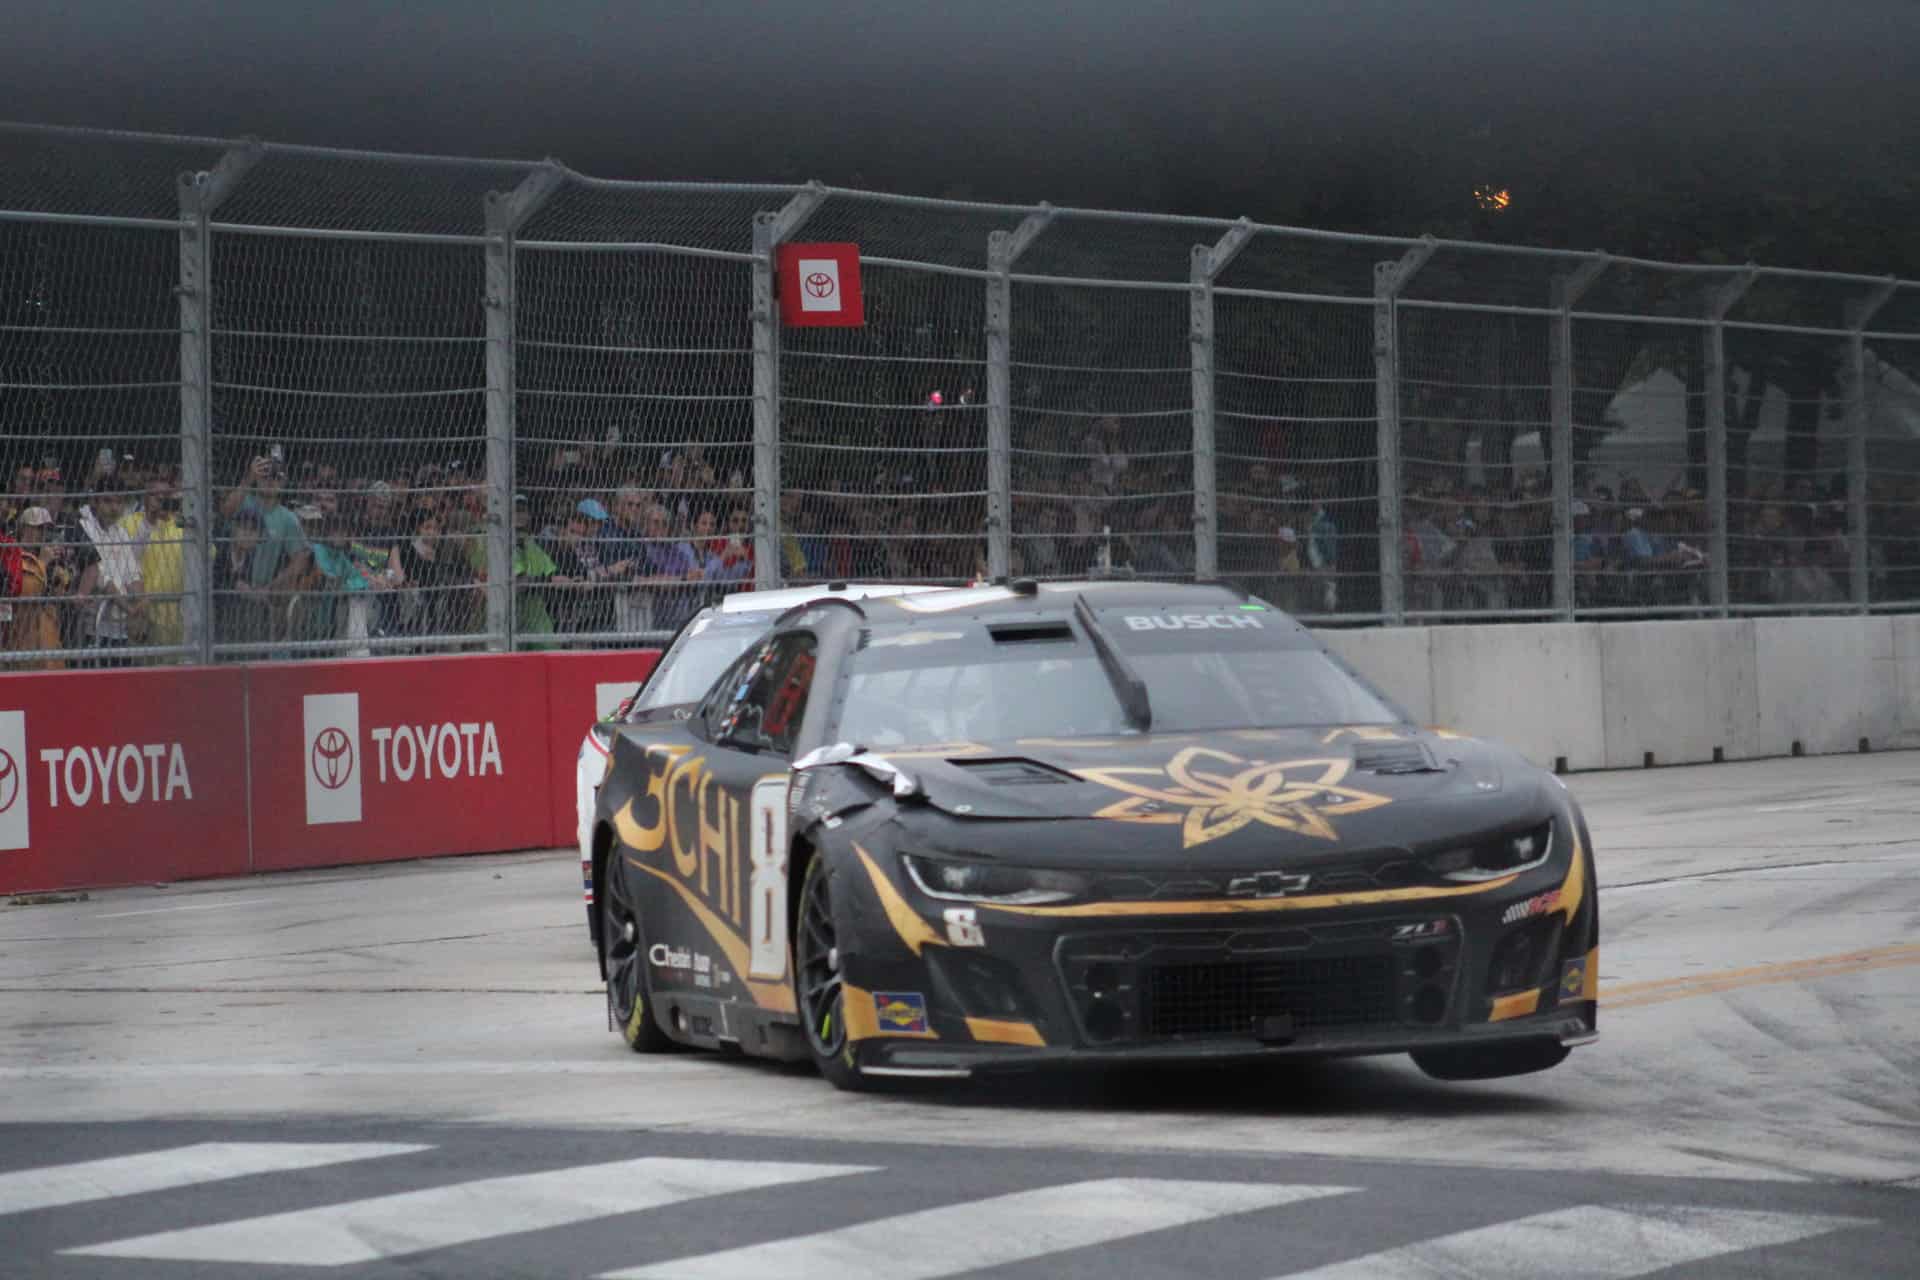 Kyle Busch rebounded from an early-race crash to score a top-five finish in the NASCAR Cup Series at the Chicago Street Race.